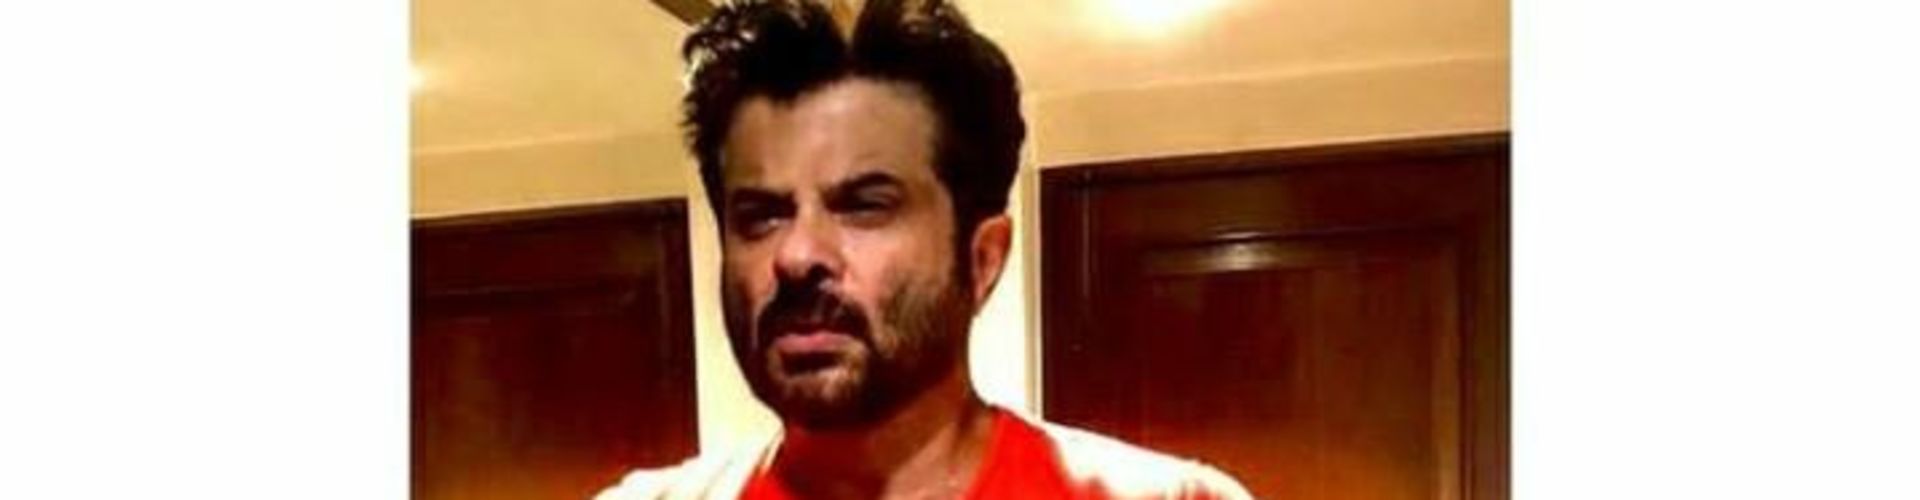 Anil Kapoor Flaunts His Muscles While Doing Workouts